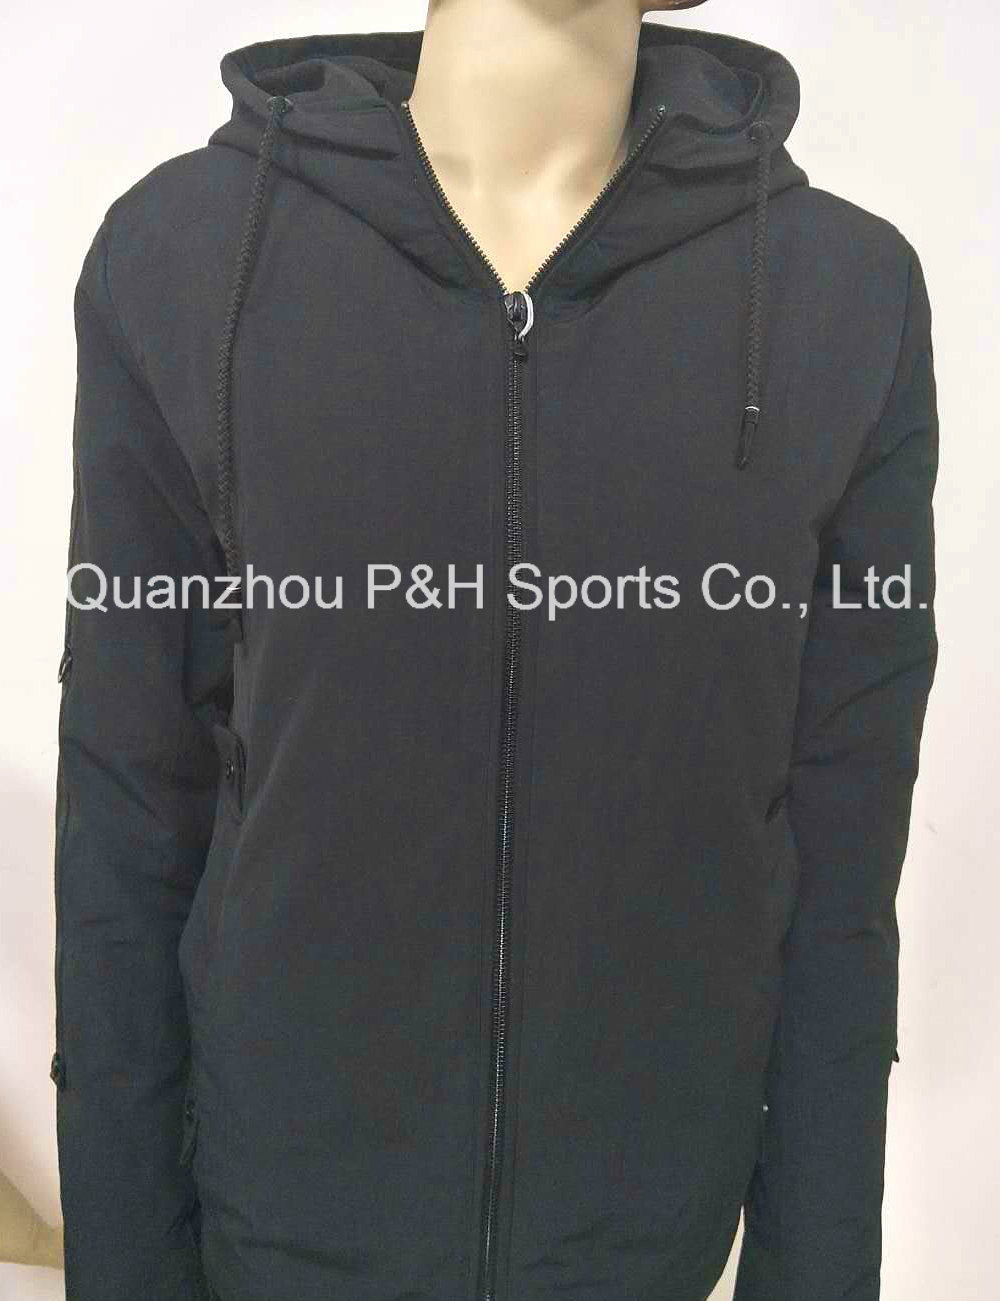 Popular Men's Soft Shell Jacket in Black and Gray Color